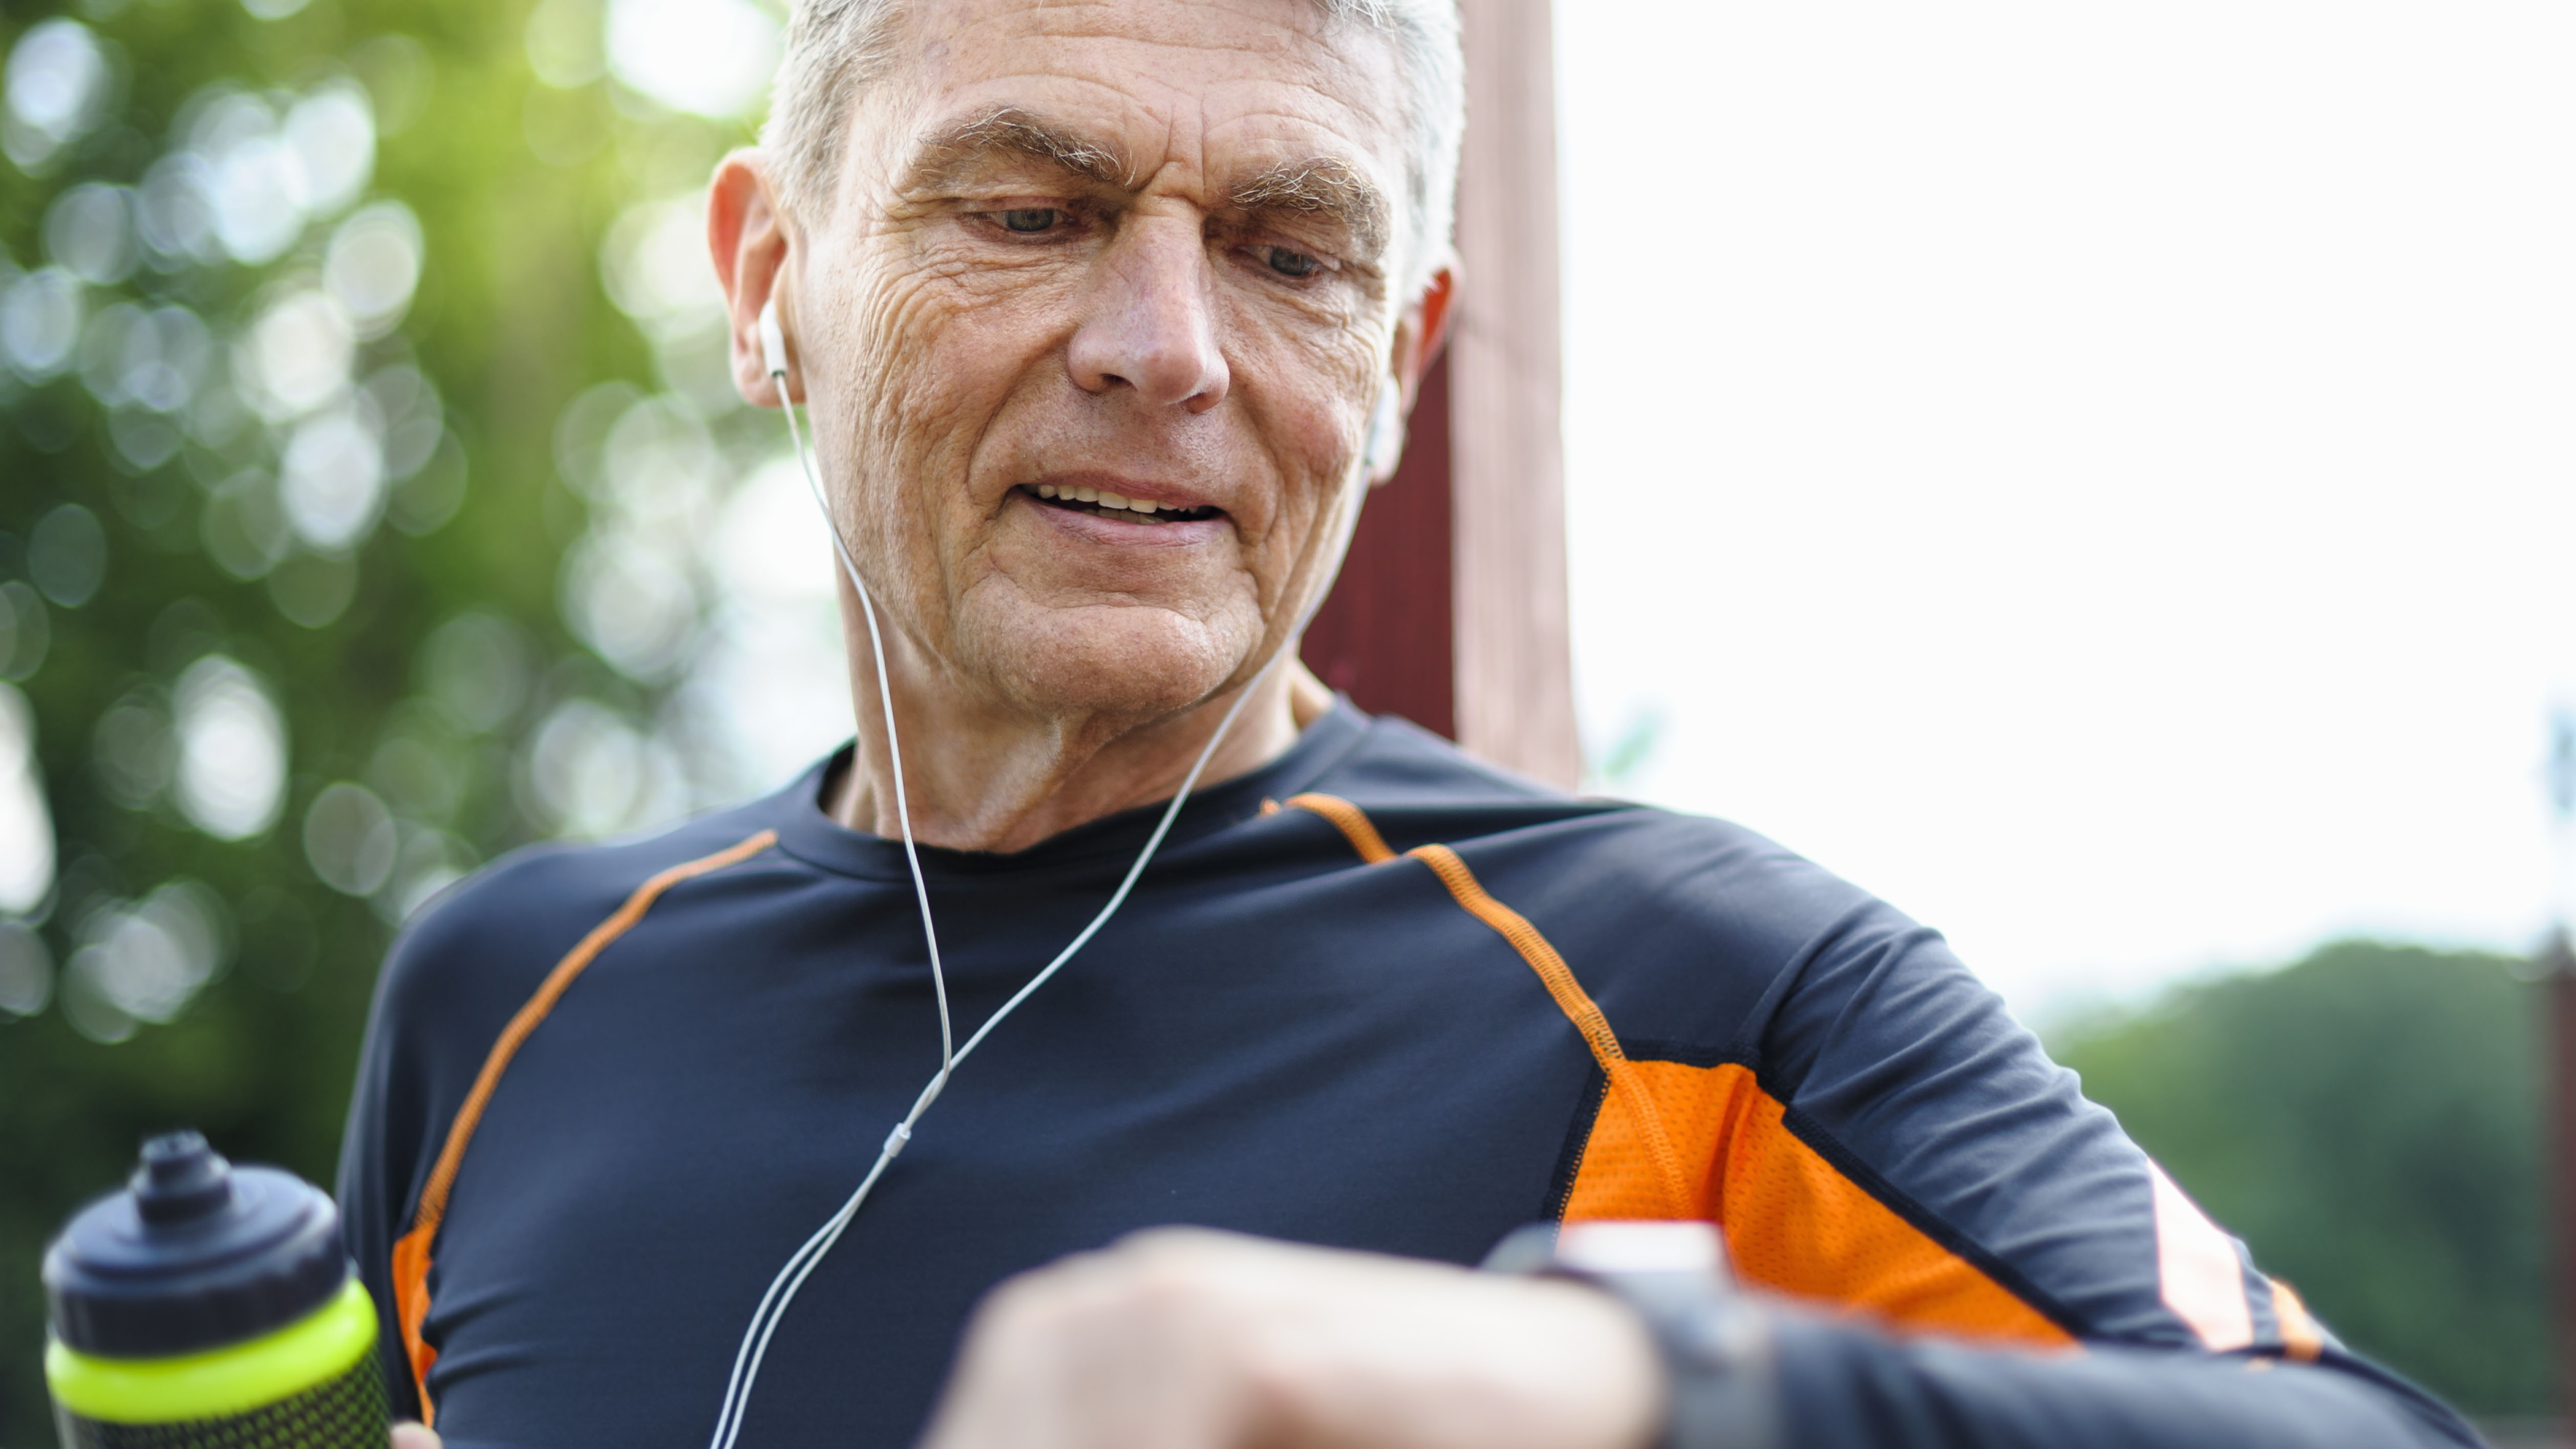 A man is wearing headphones and looking at a fitness tracker